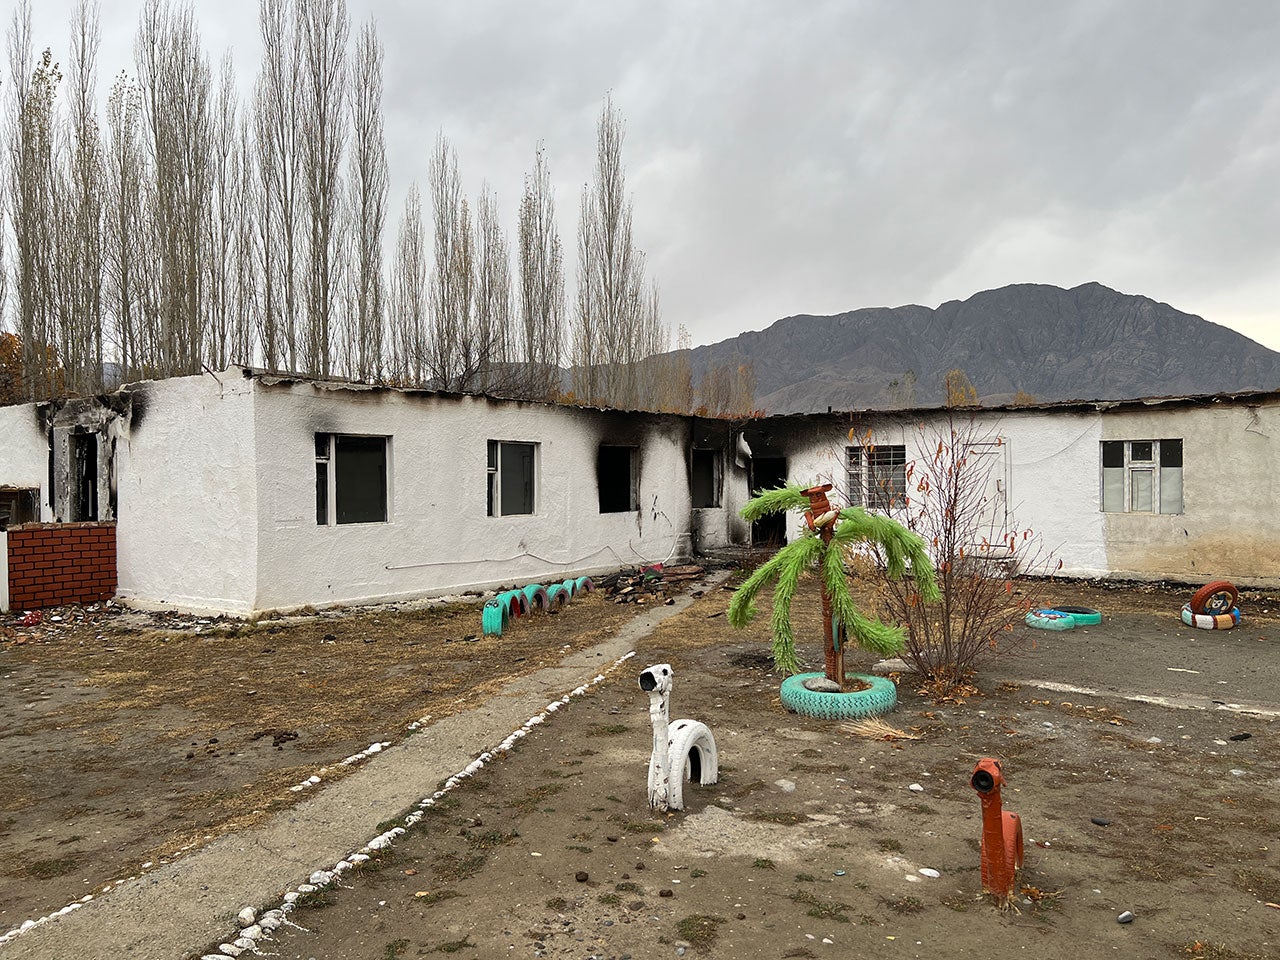 A burnt-out kindergarten in the Kyrgyz village of Ak-Sai. The village saw widespread looting and destruction while briefly under the control of Tajik forces on September 16, 2022.